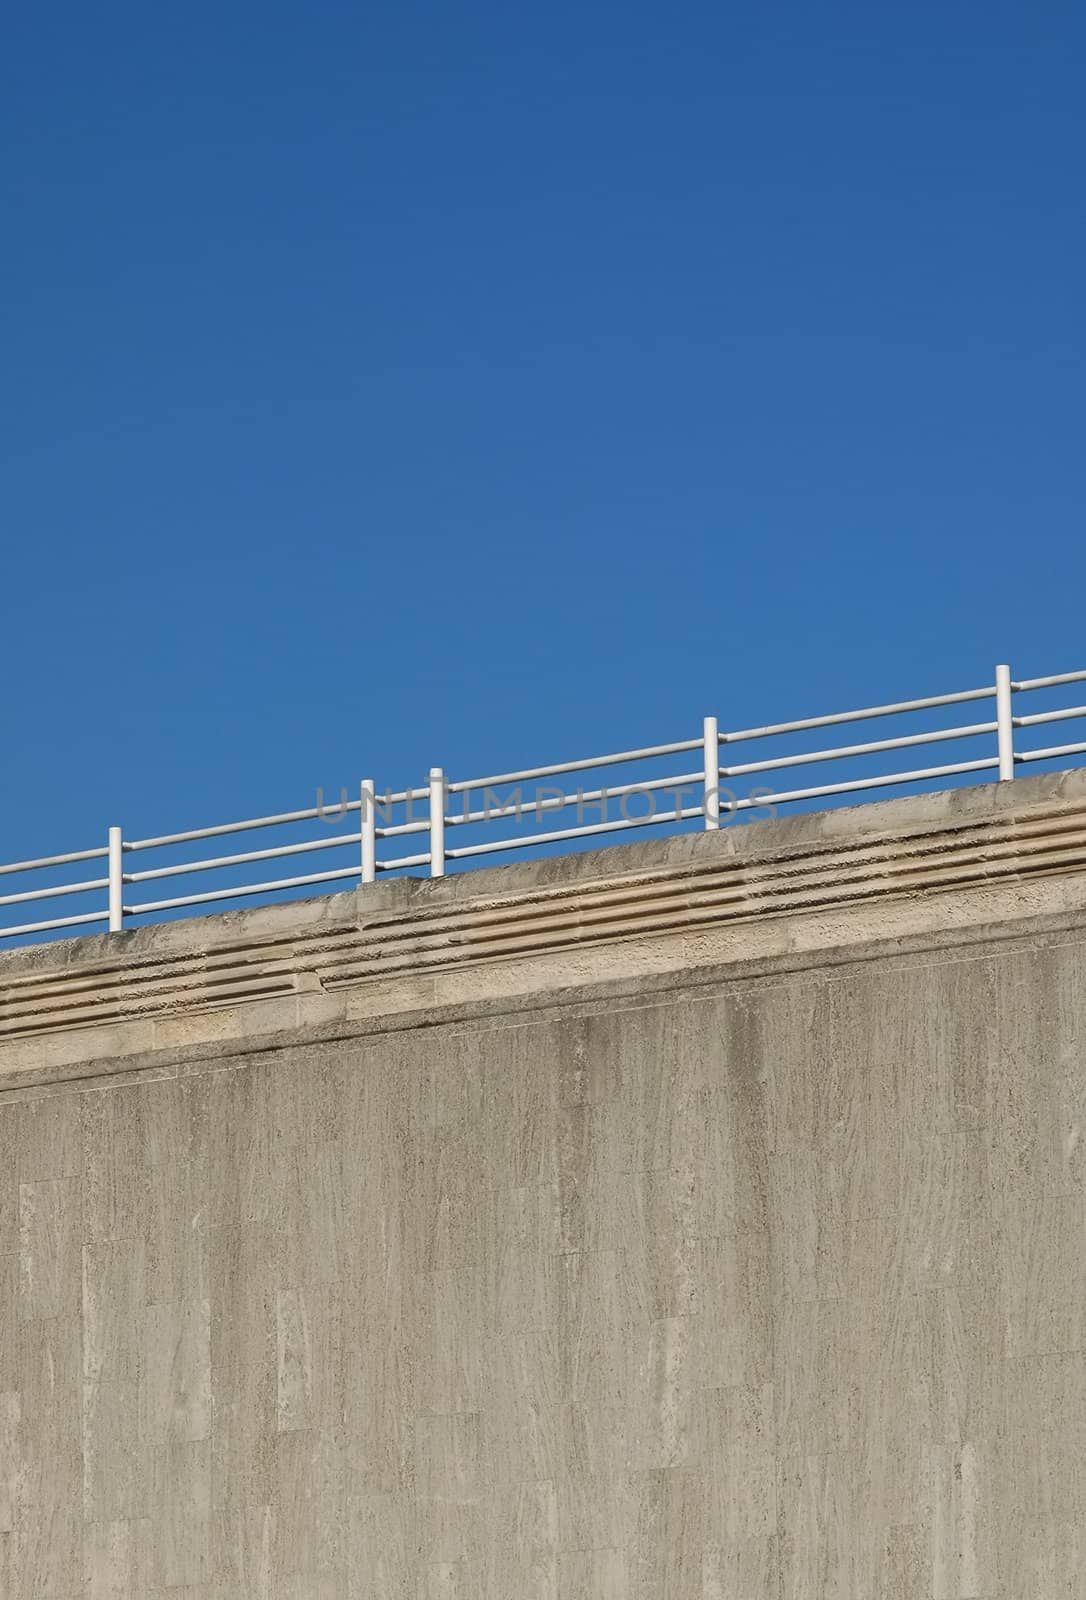 concrete wall and railings against a blue sky